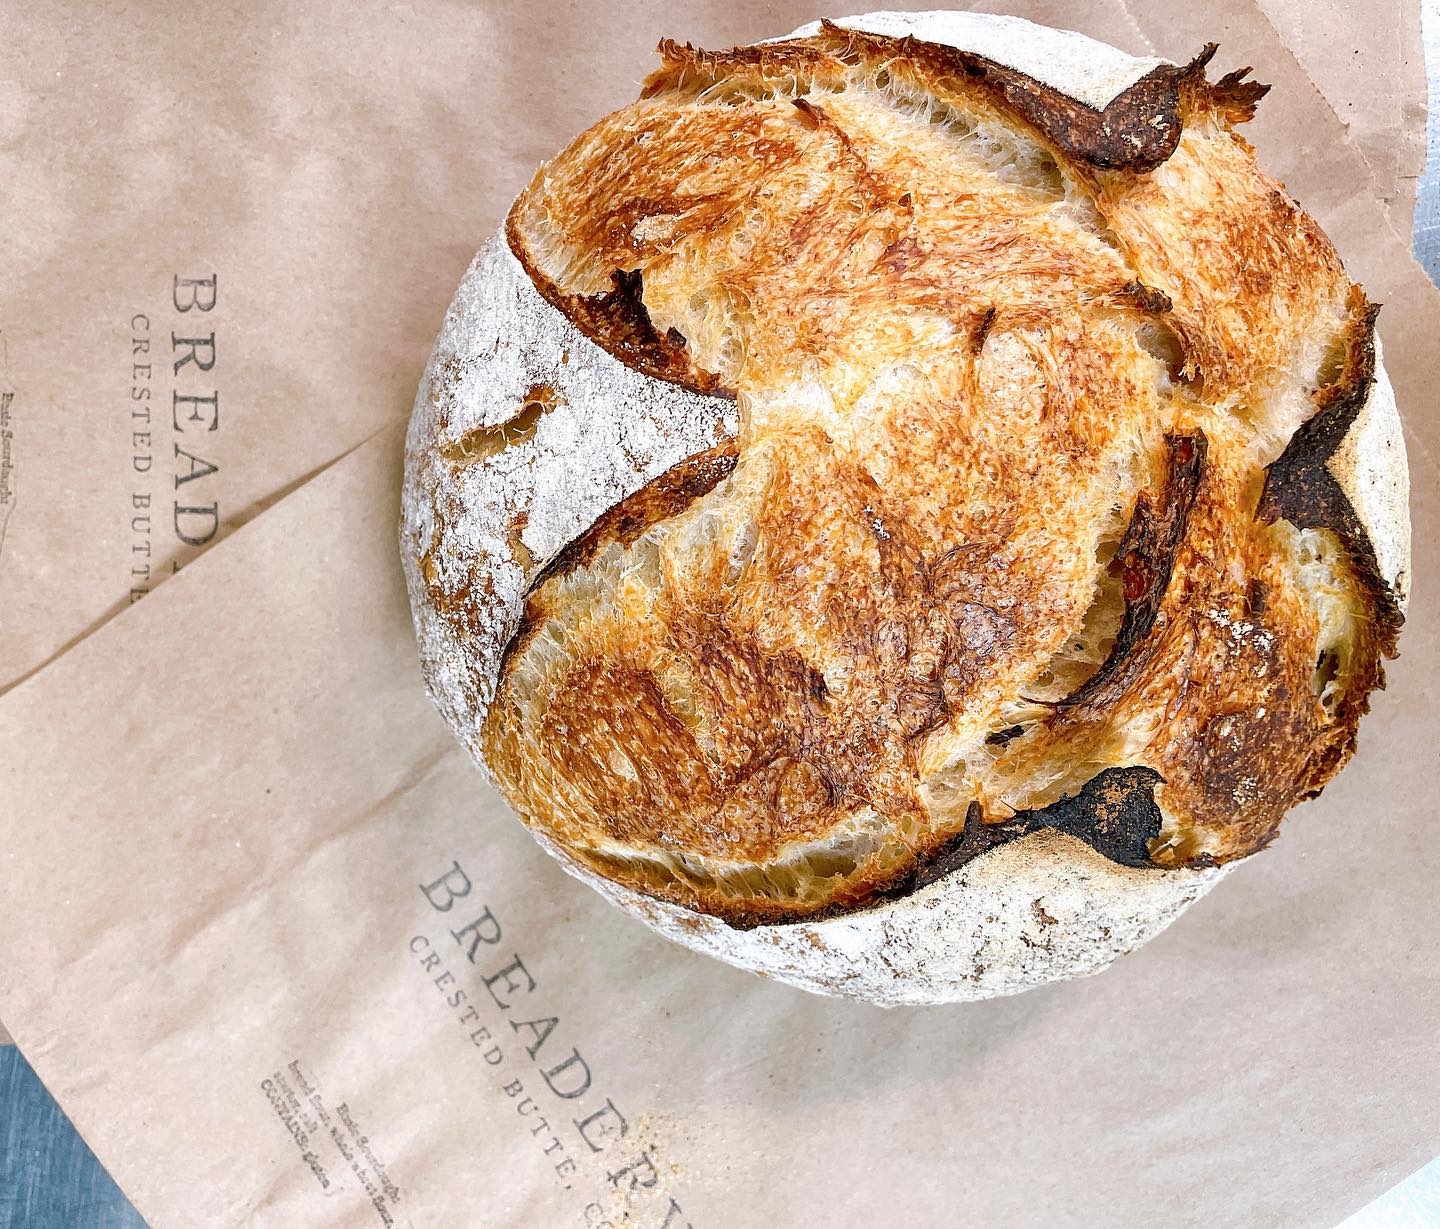 Breadery Eatery Bar & Bakehouse - Crested Butte, CO